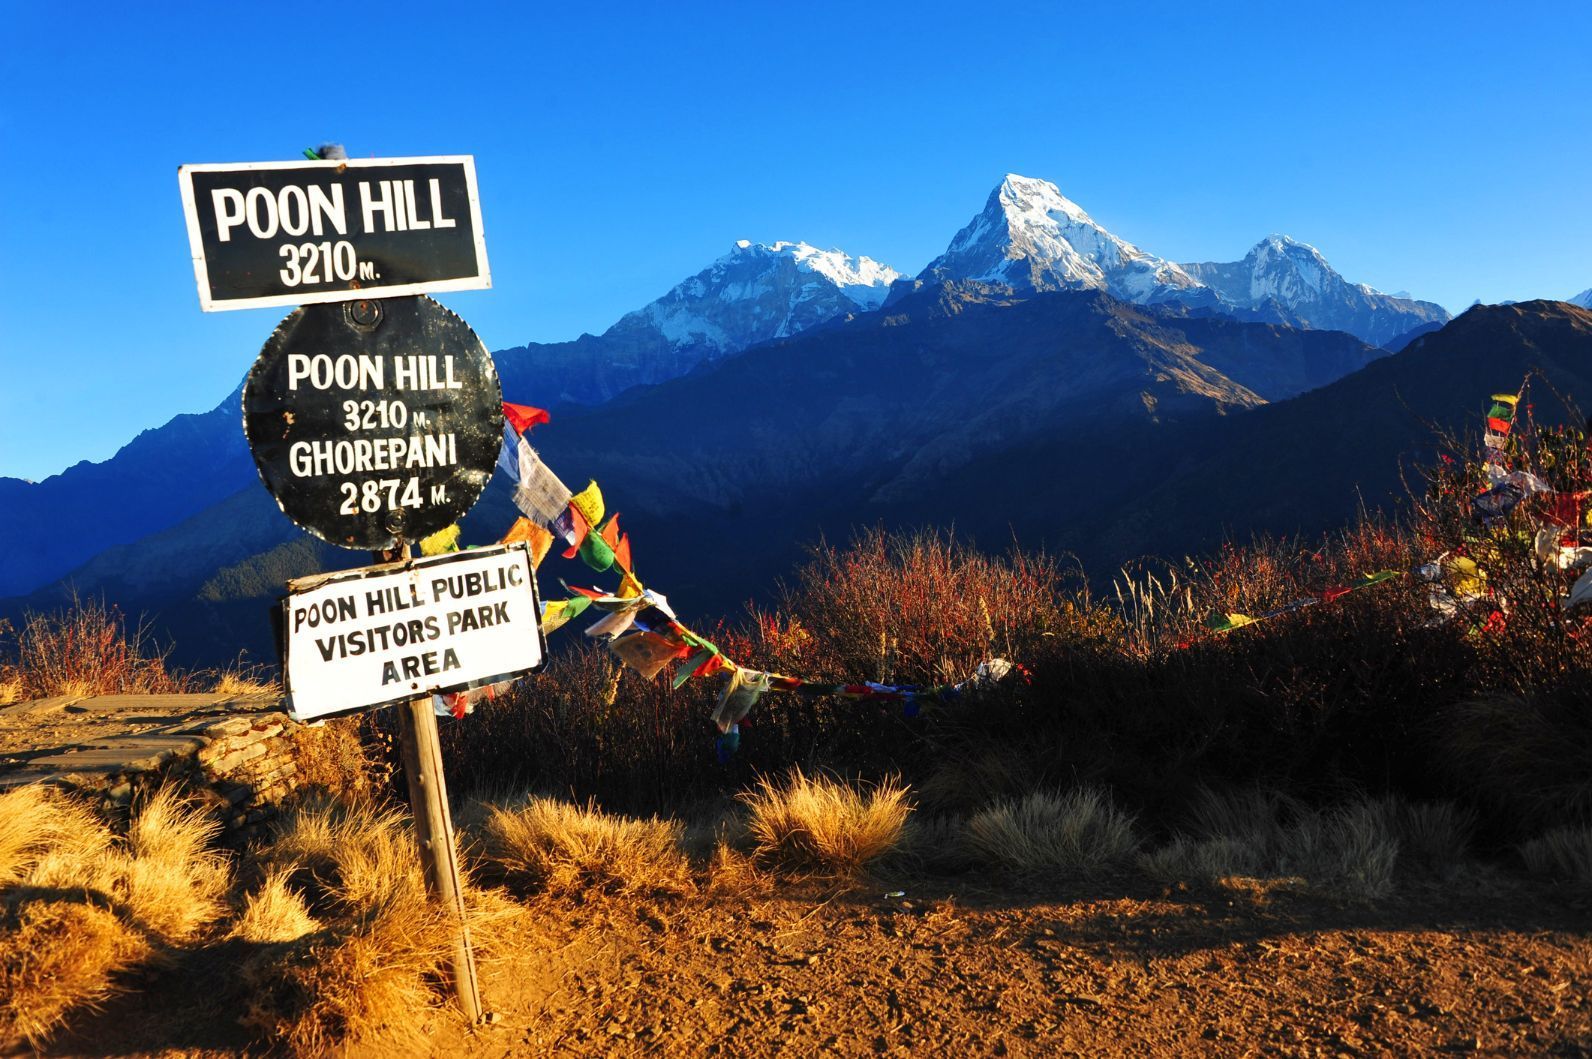 The sign for Poon Hill, in the Nepalese Himalayas